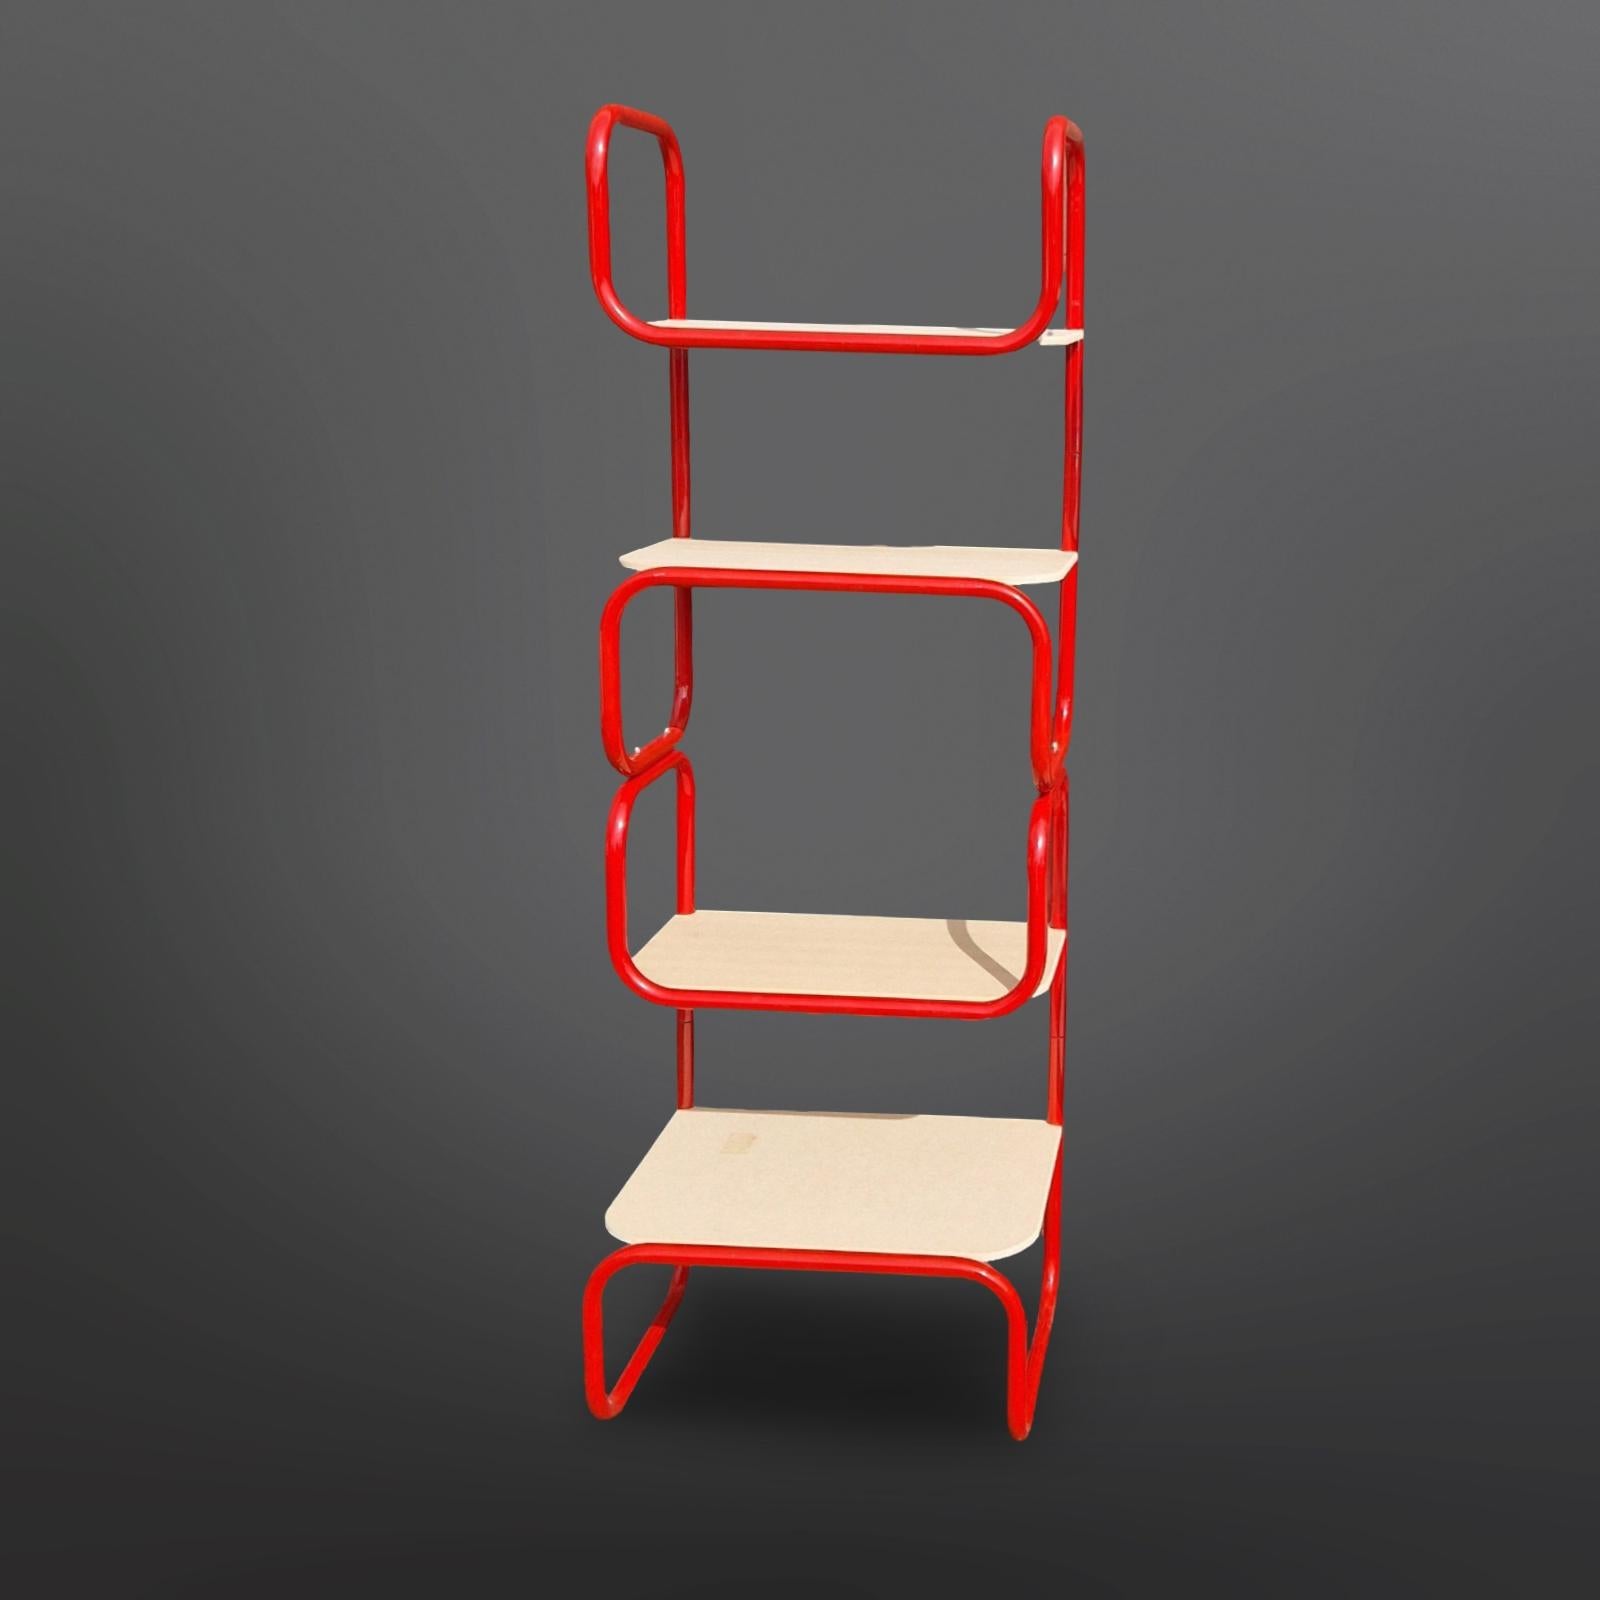 1970s Post modern modular shelving units. Designed in the manner of the Memphis group and the Bauhaus movement. It has a red lacquered steel frame with MDF shelves. The bottom shelve measures 51cm in depth while the three upper ones measure 41cm in